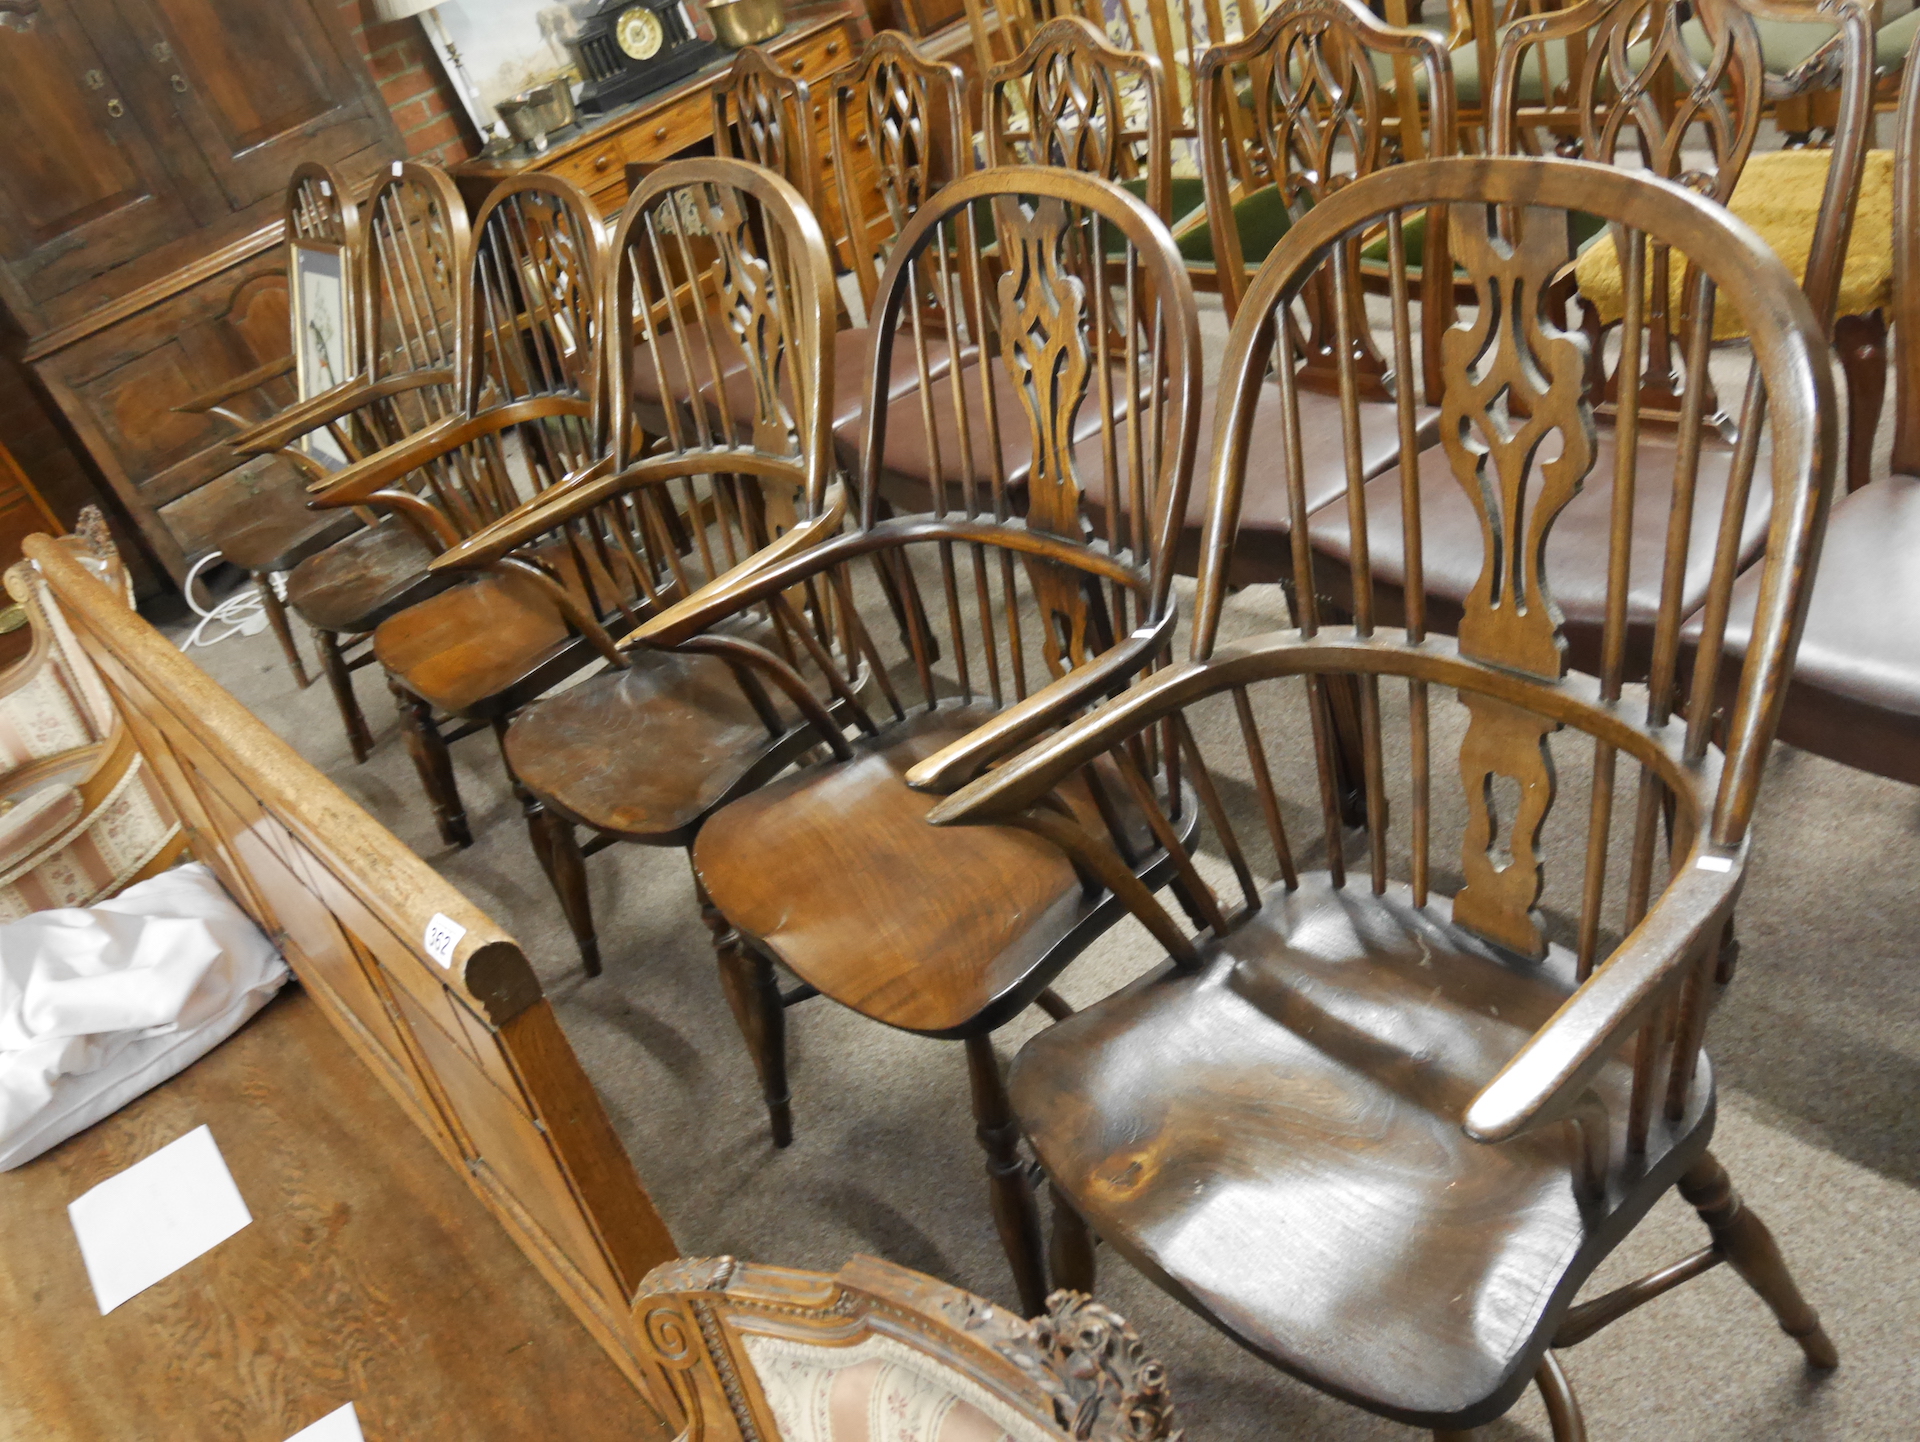 Set of 6 Windsor chairs